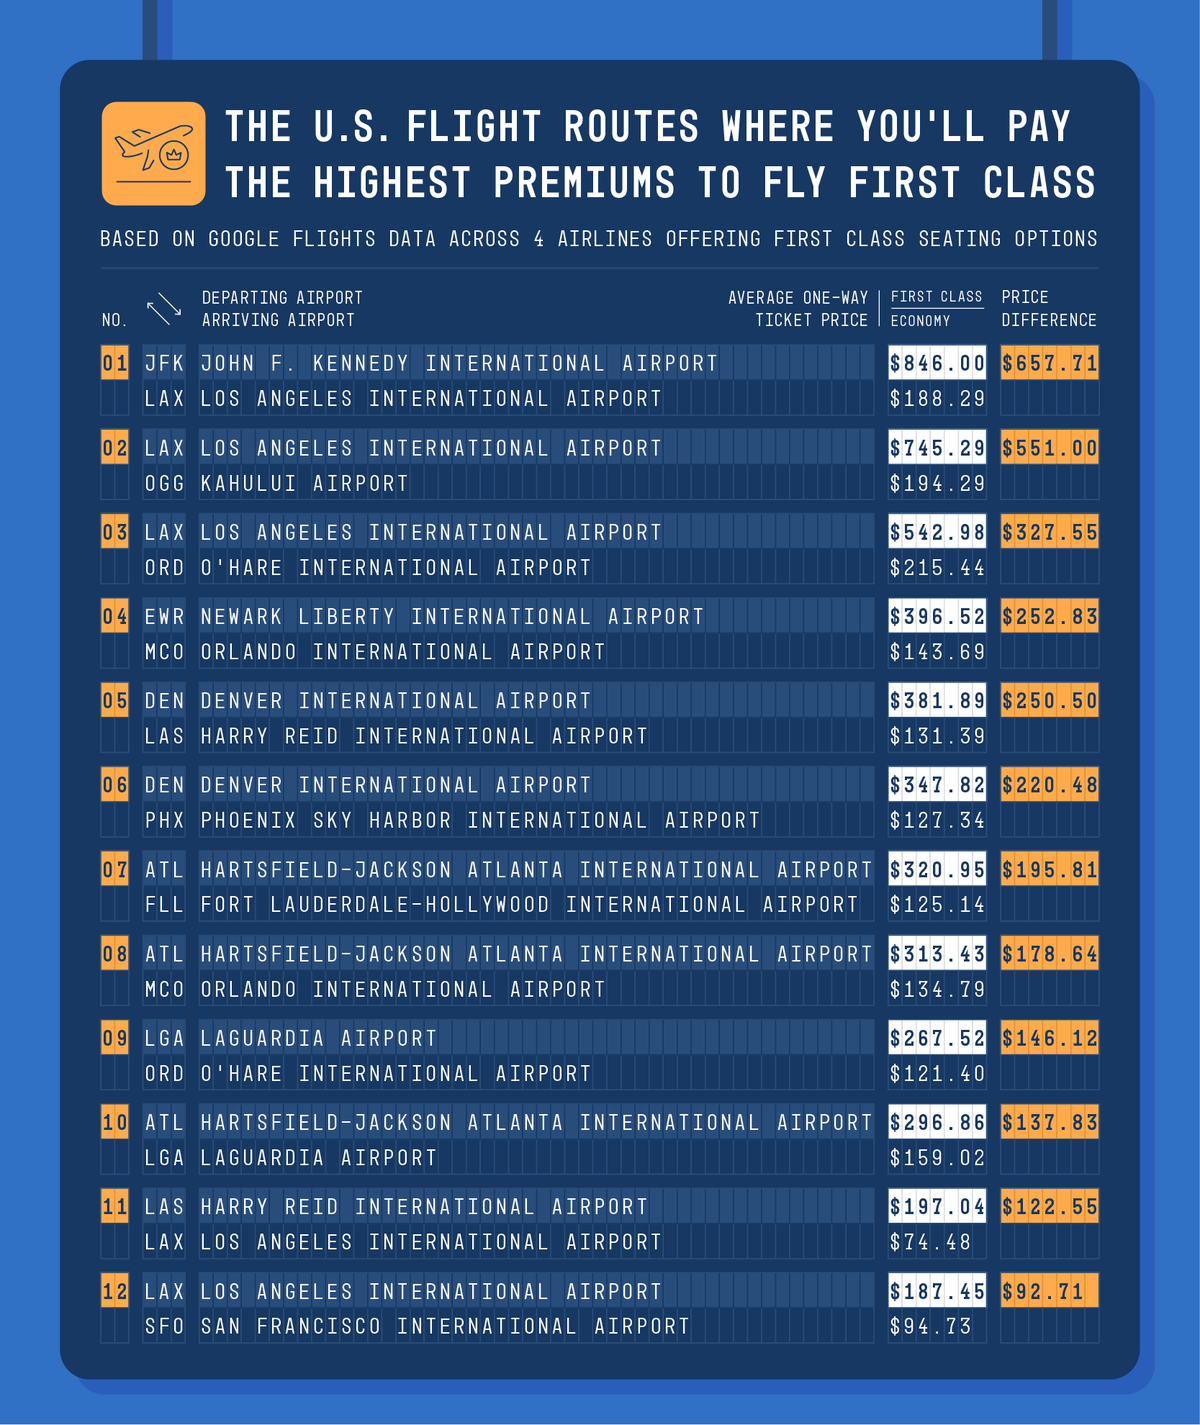 Table showing the average price difference between economy and first class seats by flight route